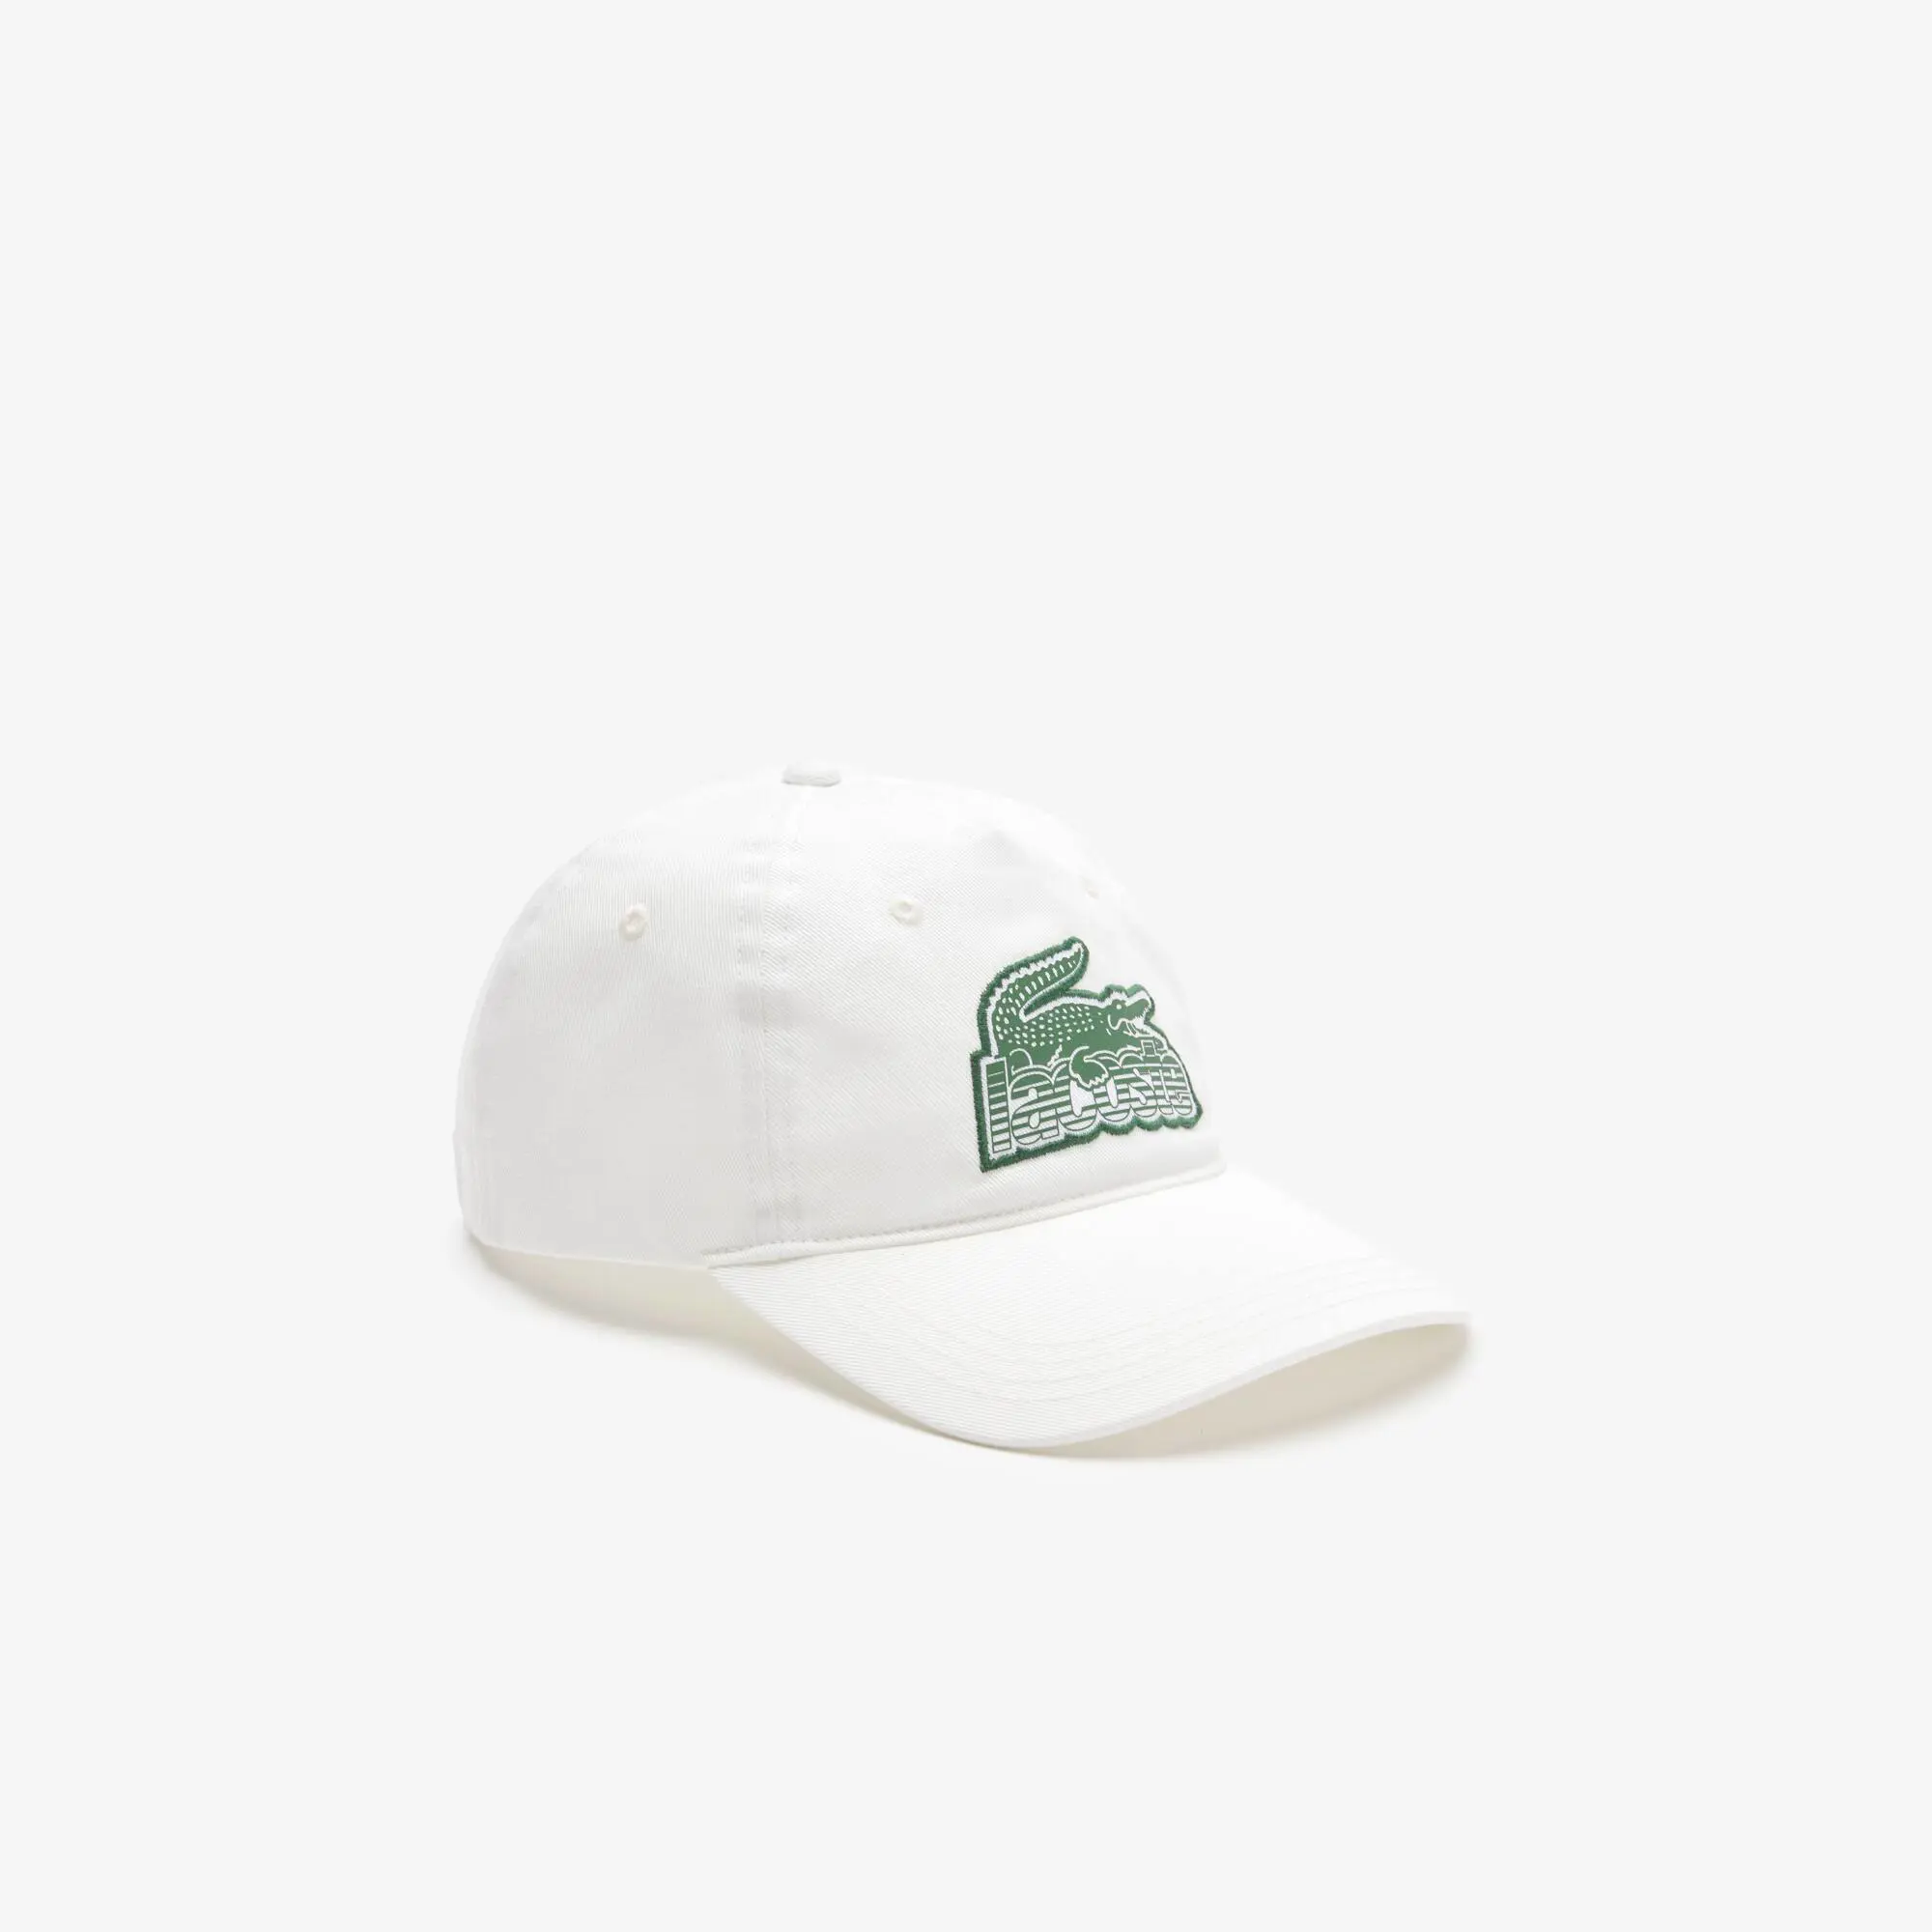 Lacoste Unisex Lacoste cap with crocodile patch and branding. 1